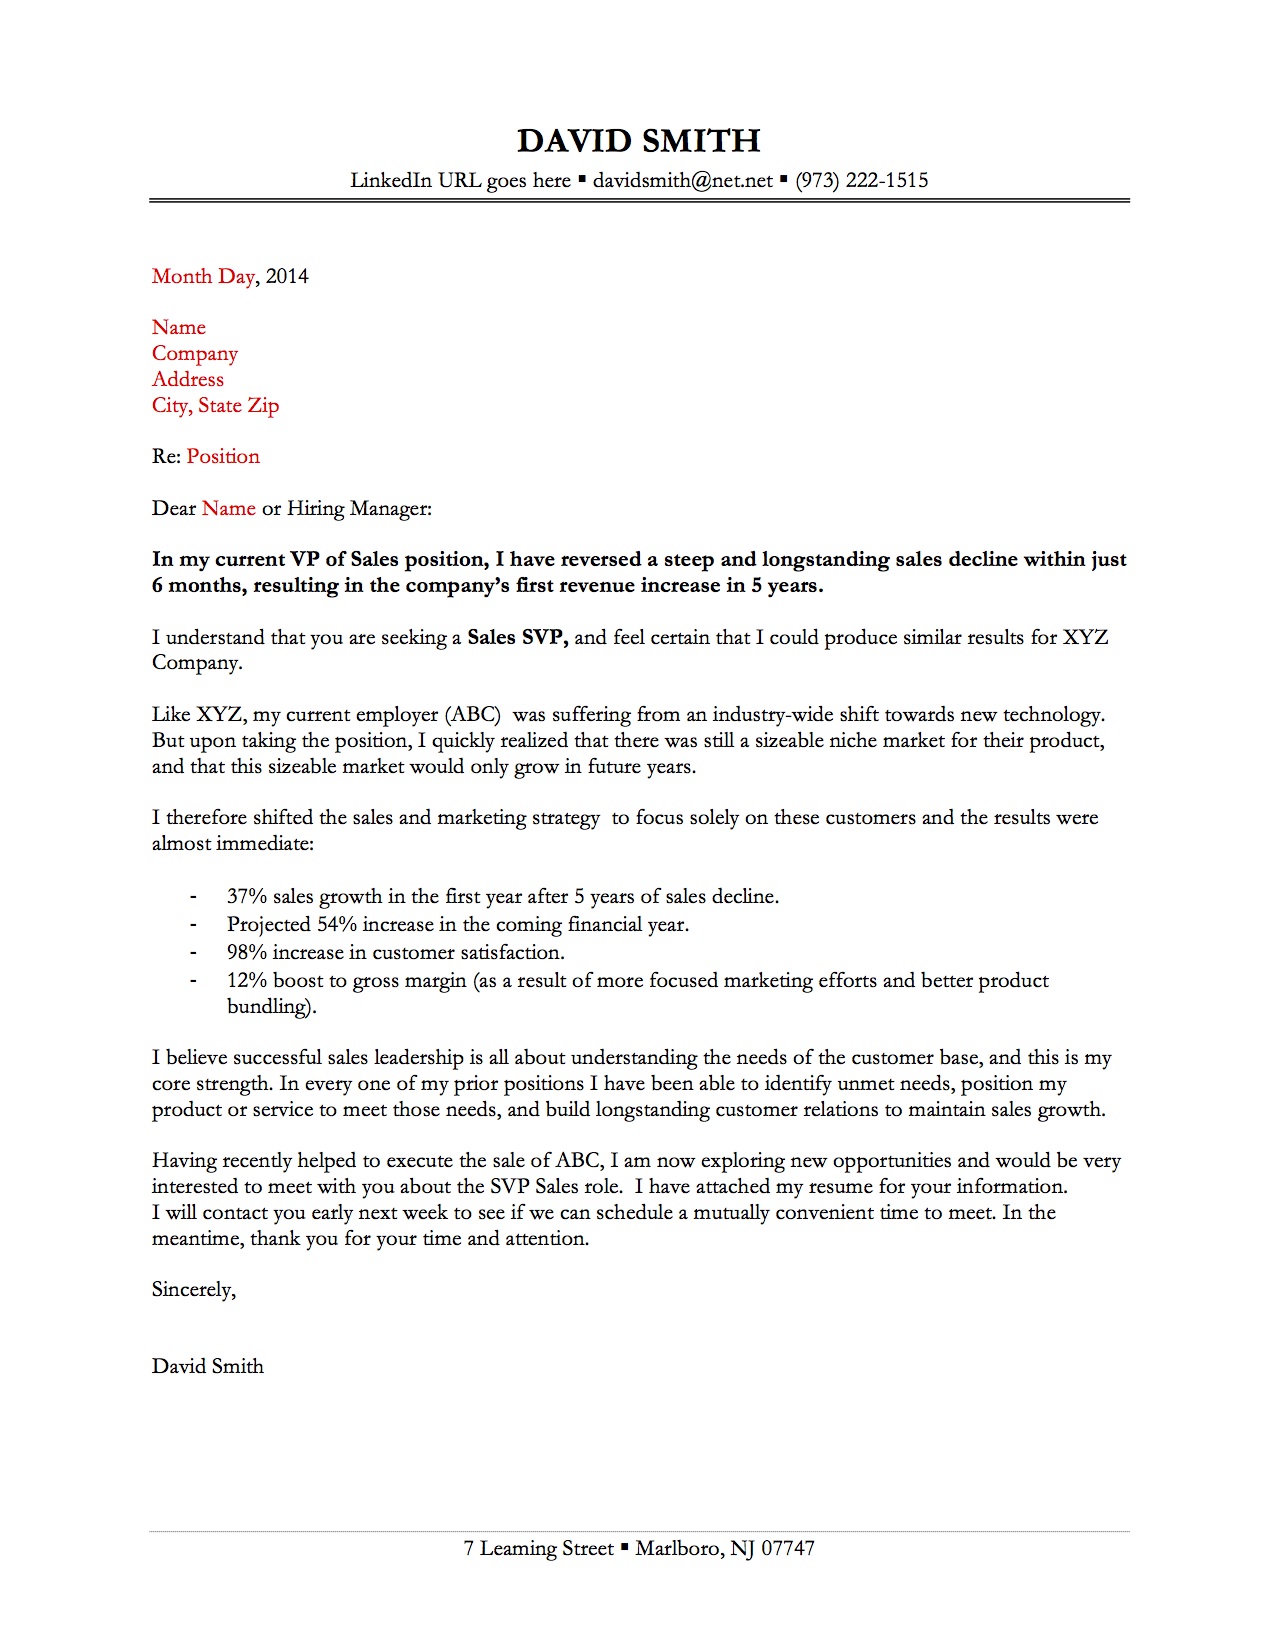 Great Cover Letters Sample Cover Letter 2 great cover letters|wikiresume.com